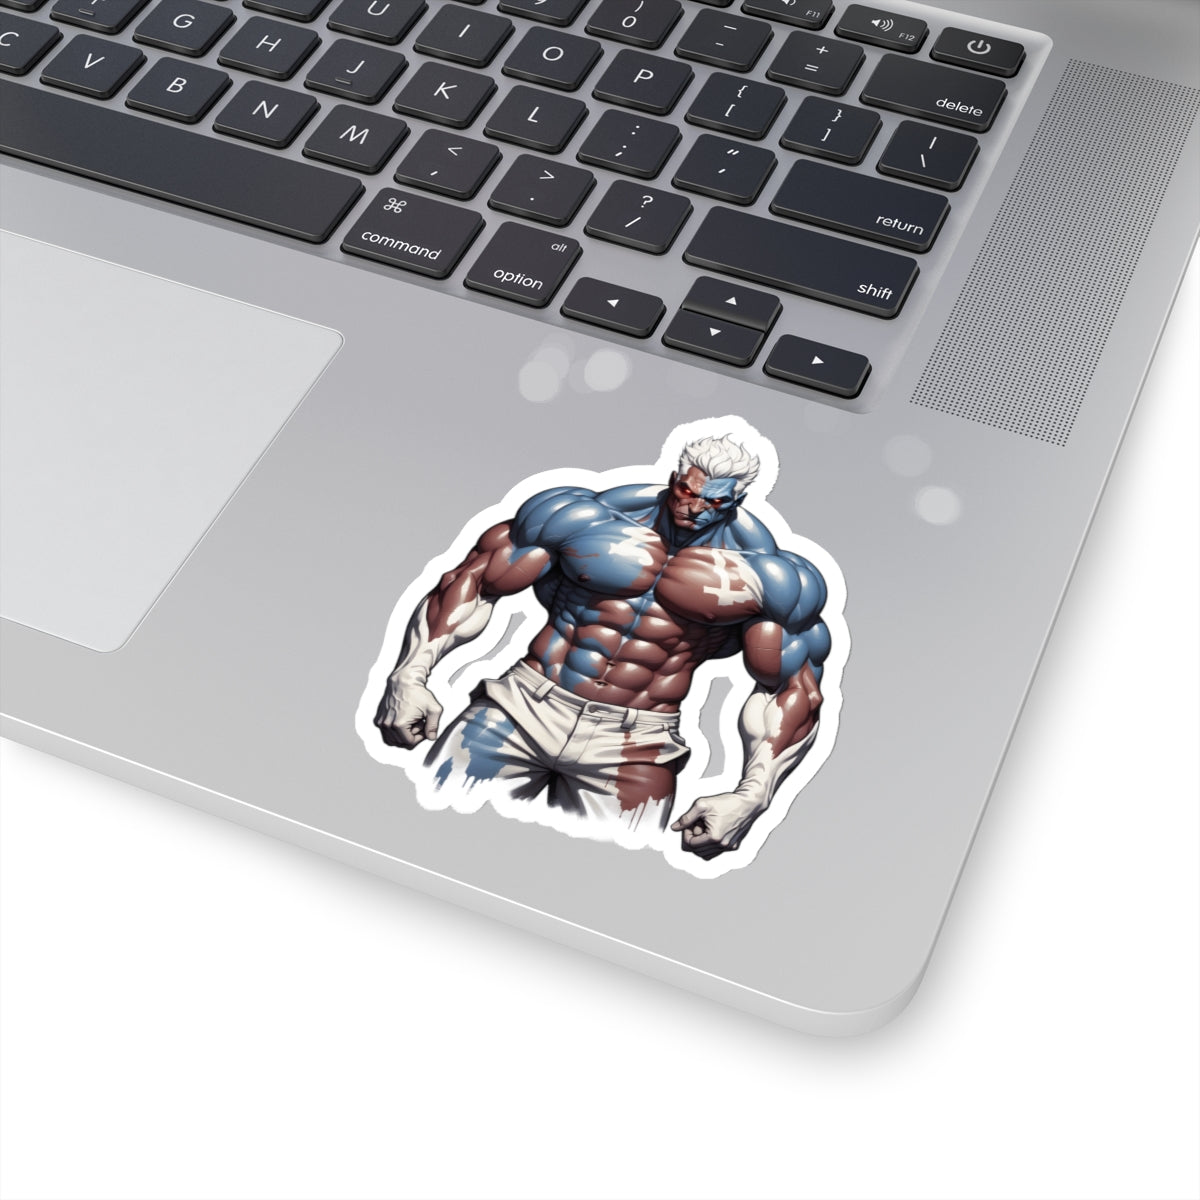 Kǎtōng Piàn - Prized Fighter Collection - America - 009 - Stickers